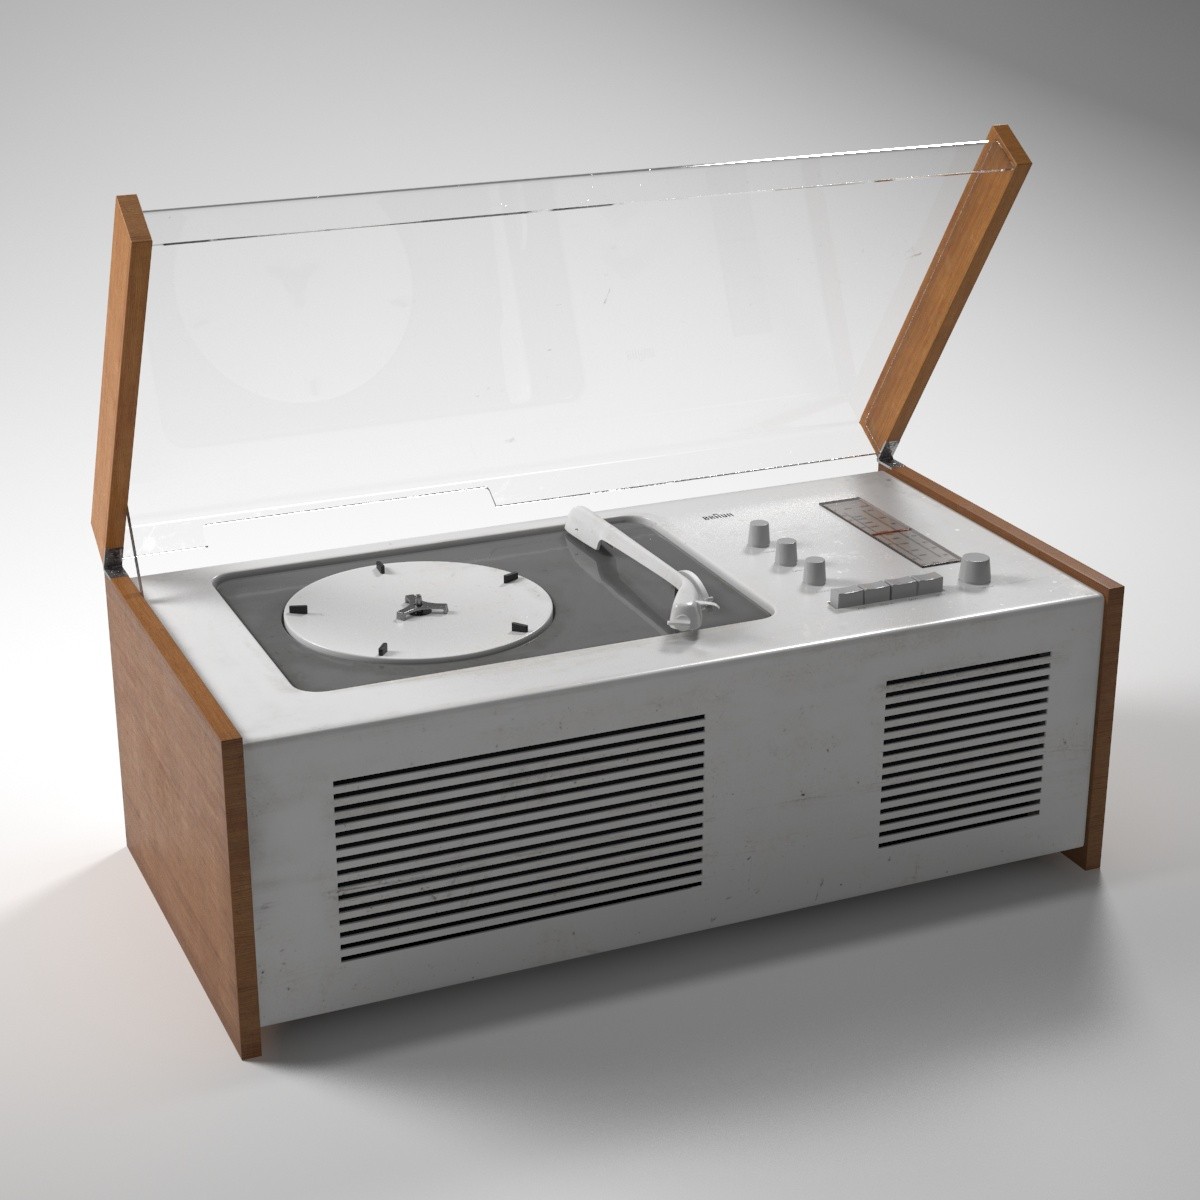 The timeless of minimal turntable design